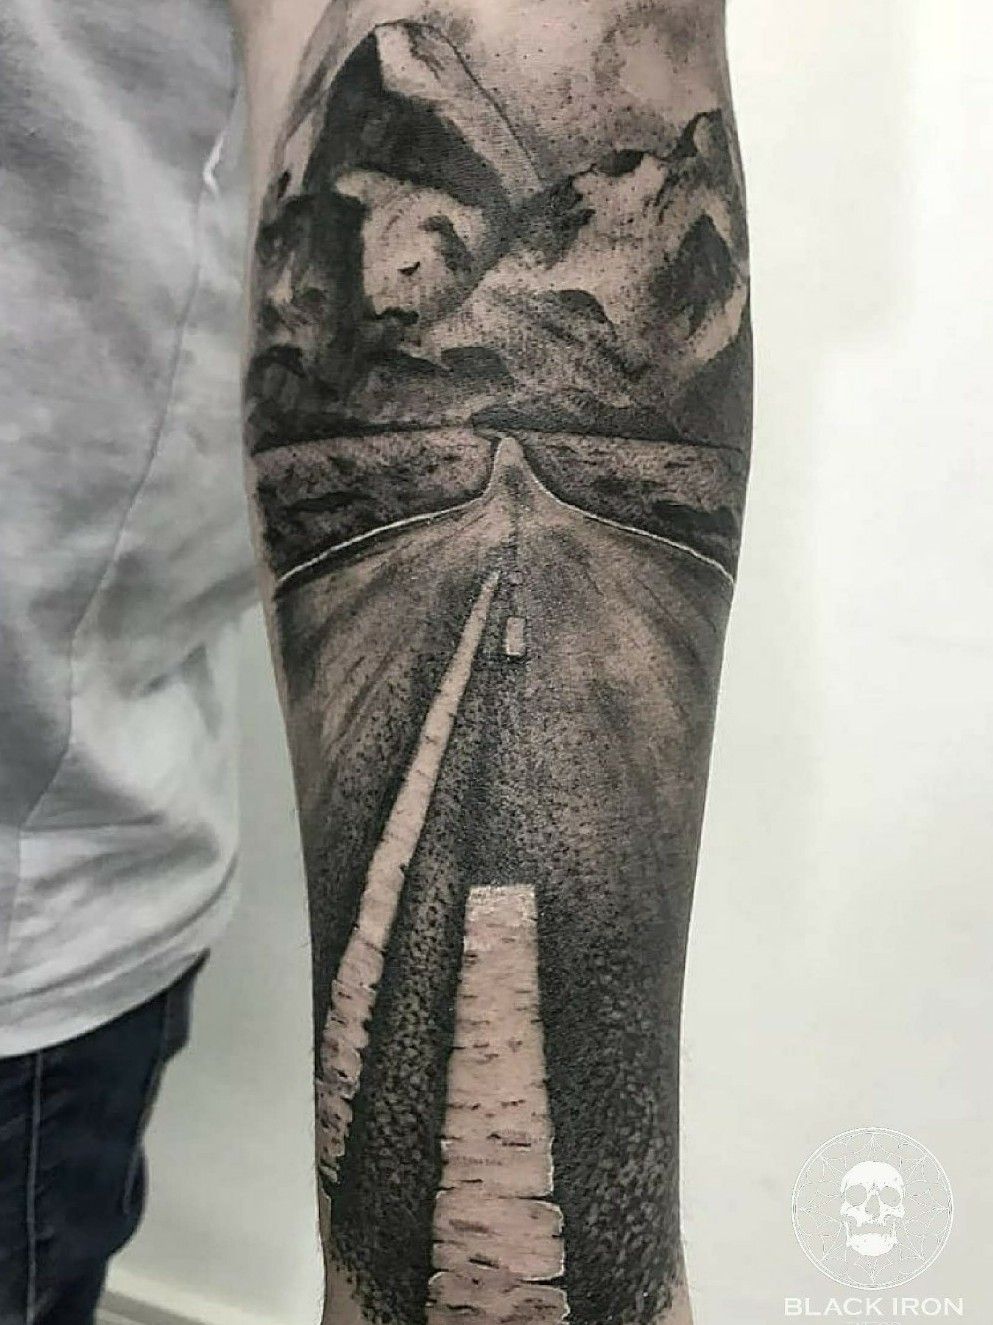 GhostLine Tattoo  Sweet open road and mountain scene done at  ghostlinetattoos andydestroy ghostlinetattoo tattoos bremerton art  mountian pnw pnwadventures nature scenery bobross blackandgrey  military  Facebook